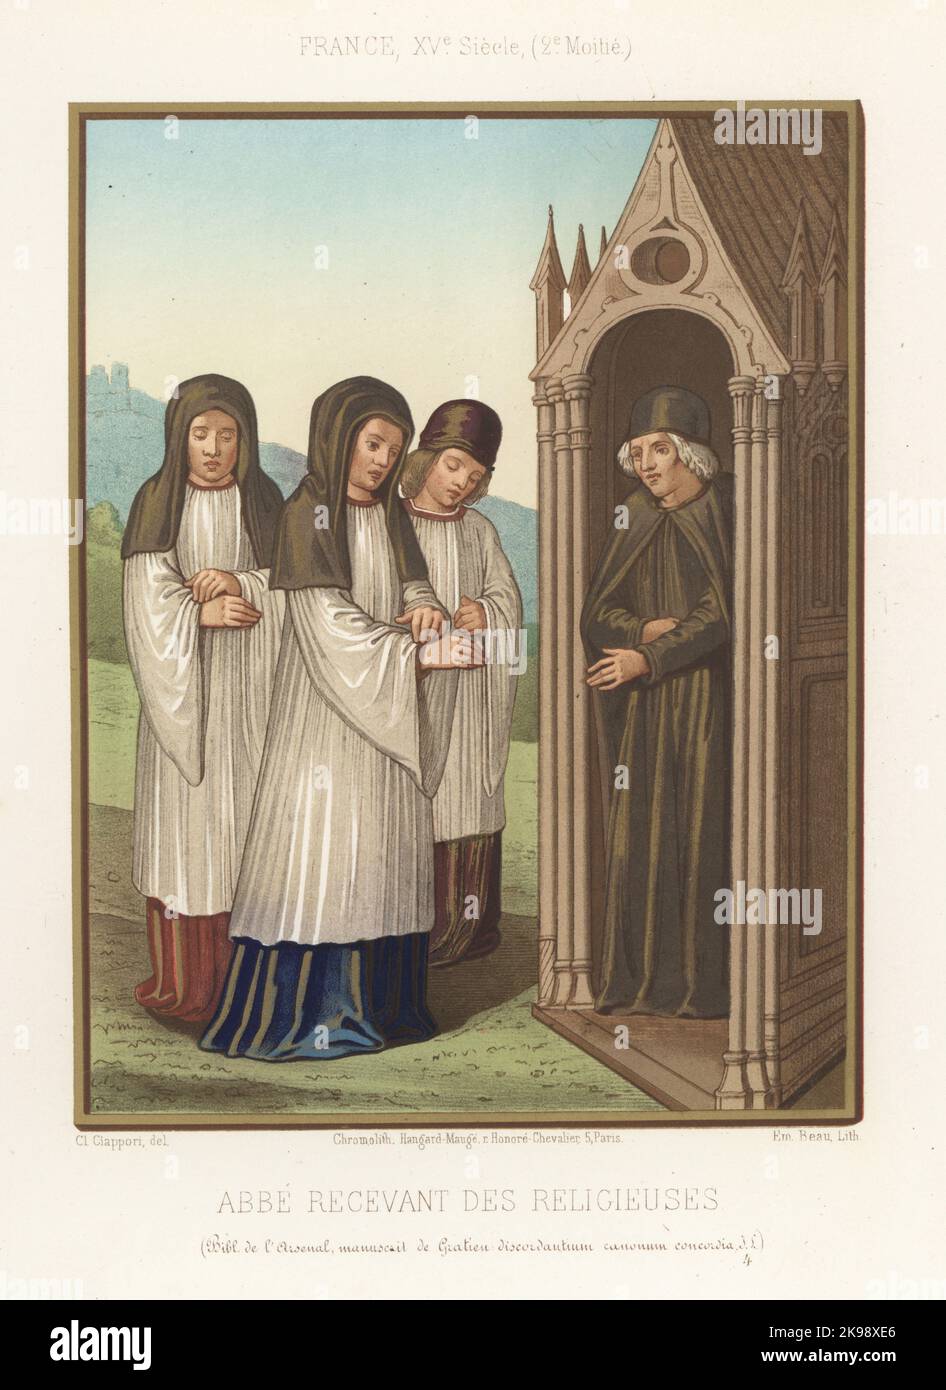 Three nuns visit an abbot, France, 15th century. The nuns in veils and habits, the abbot standing in a gothic gabled porch. Abbe recevant des religieuses. France, XVe siecle. From Gratian's Decretum manuscript, MS JL4, Bibliotheque de l'Arsenal. Chromolithograph by Emile Beau after an illustration by Claudius Joseph Ciappori from Charles Louandre’s Les Arts Somptuaires, The Sumptuary Arts, Hangard-Mauge, Paris, 1858. Stock Photo